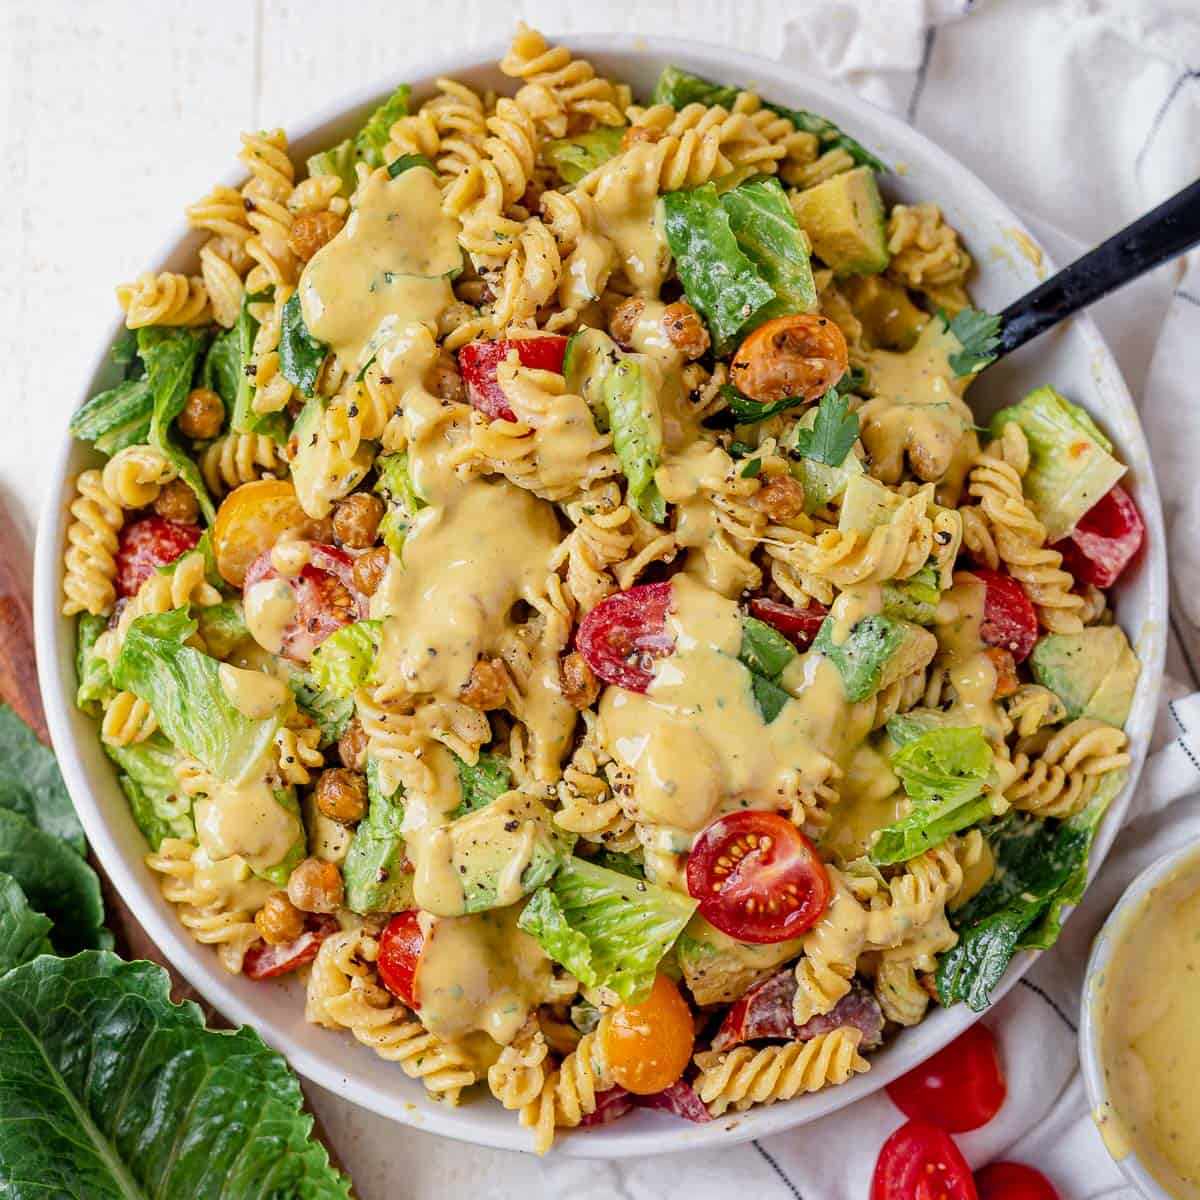 https://whatmollymade.com/wp-content/uploads/2020/08/healthy-cold-pasta-salad.jpg